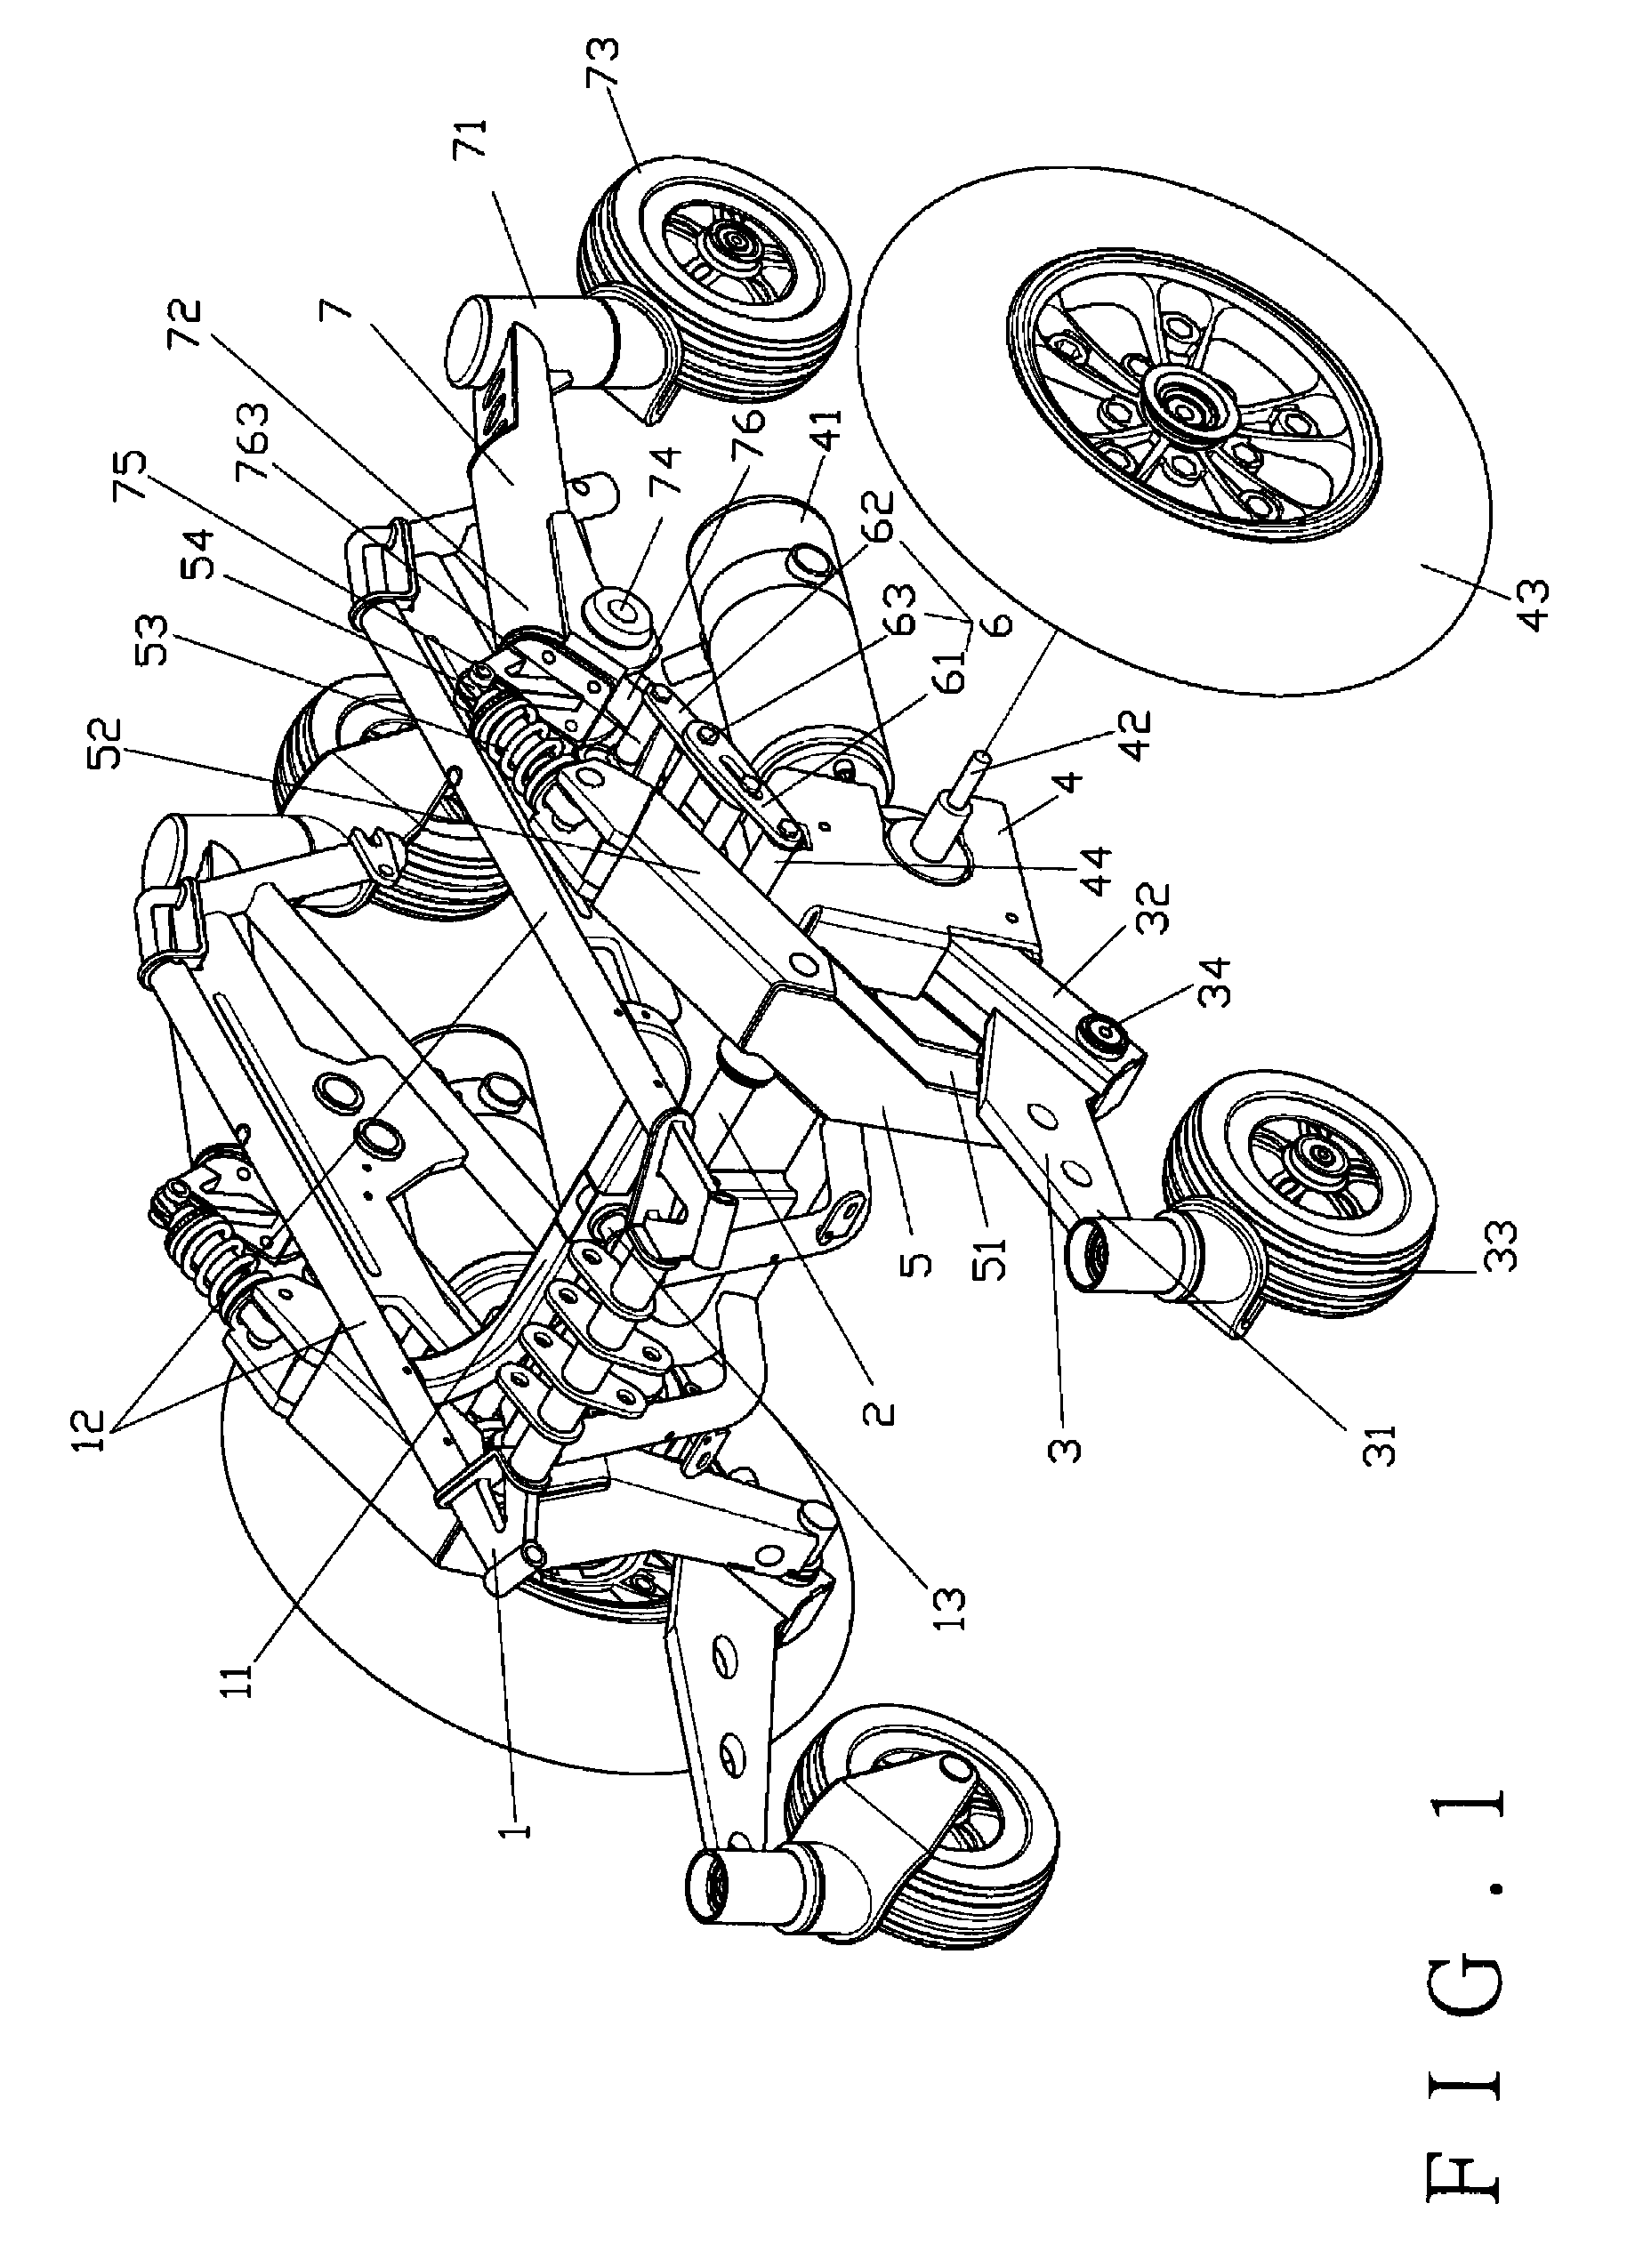 Chassis structure for mid-wheel drive power wheelchair